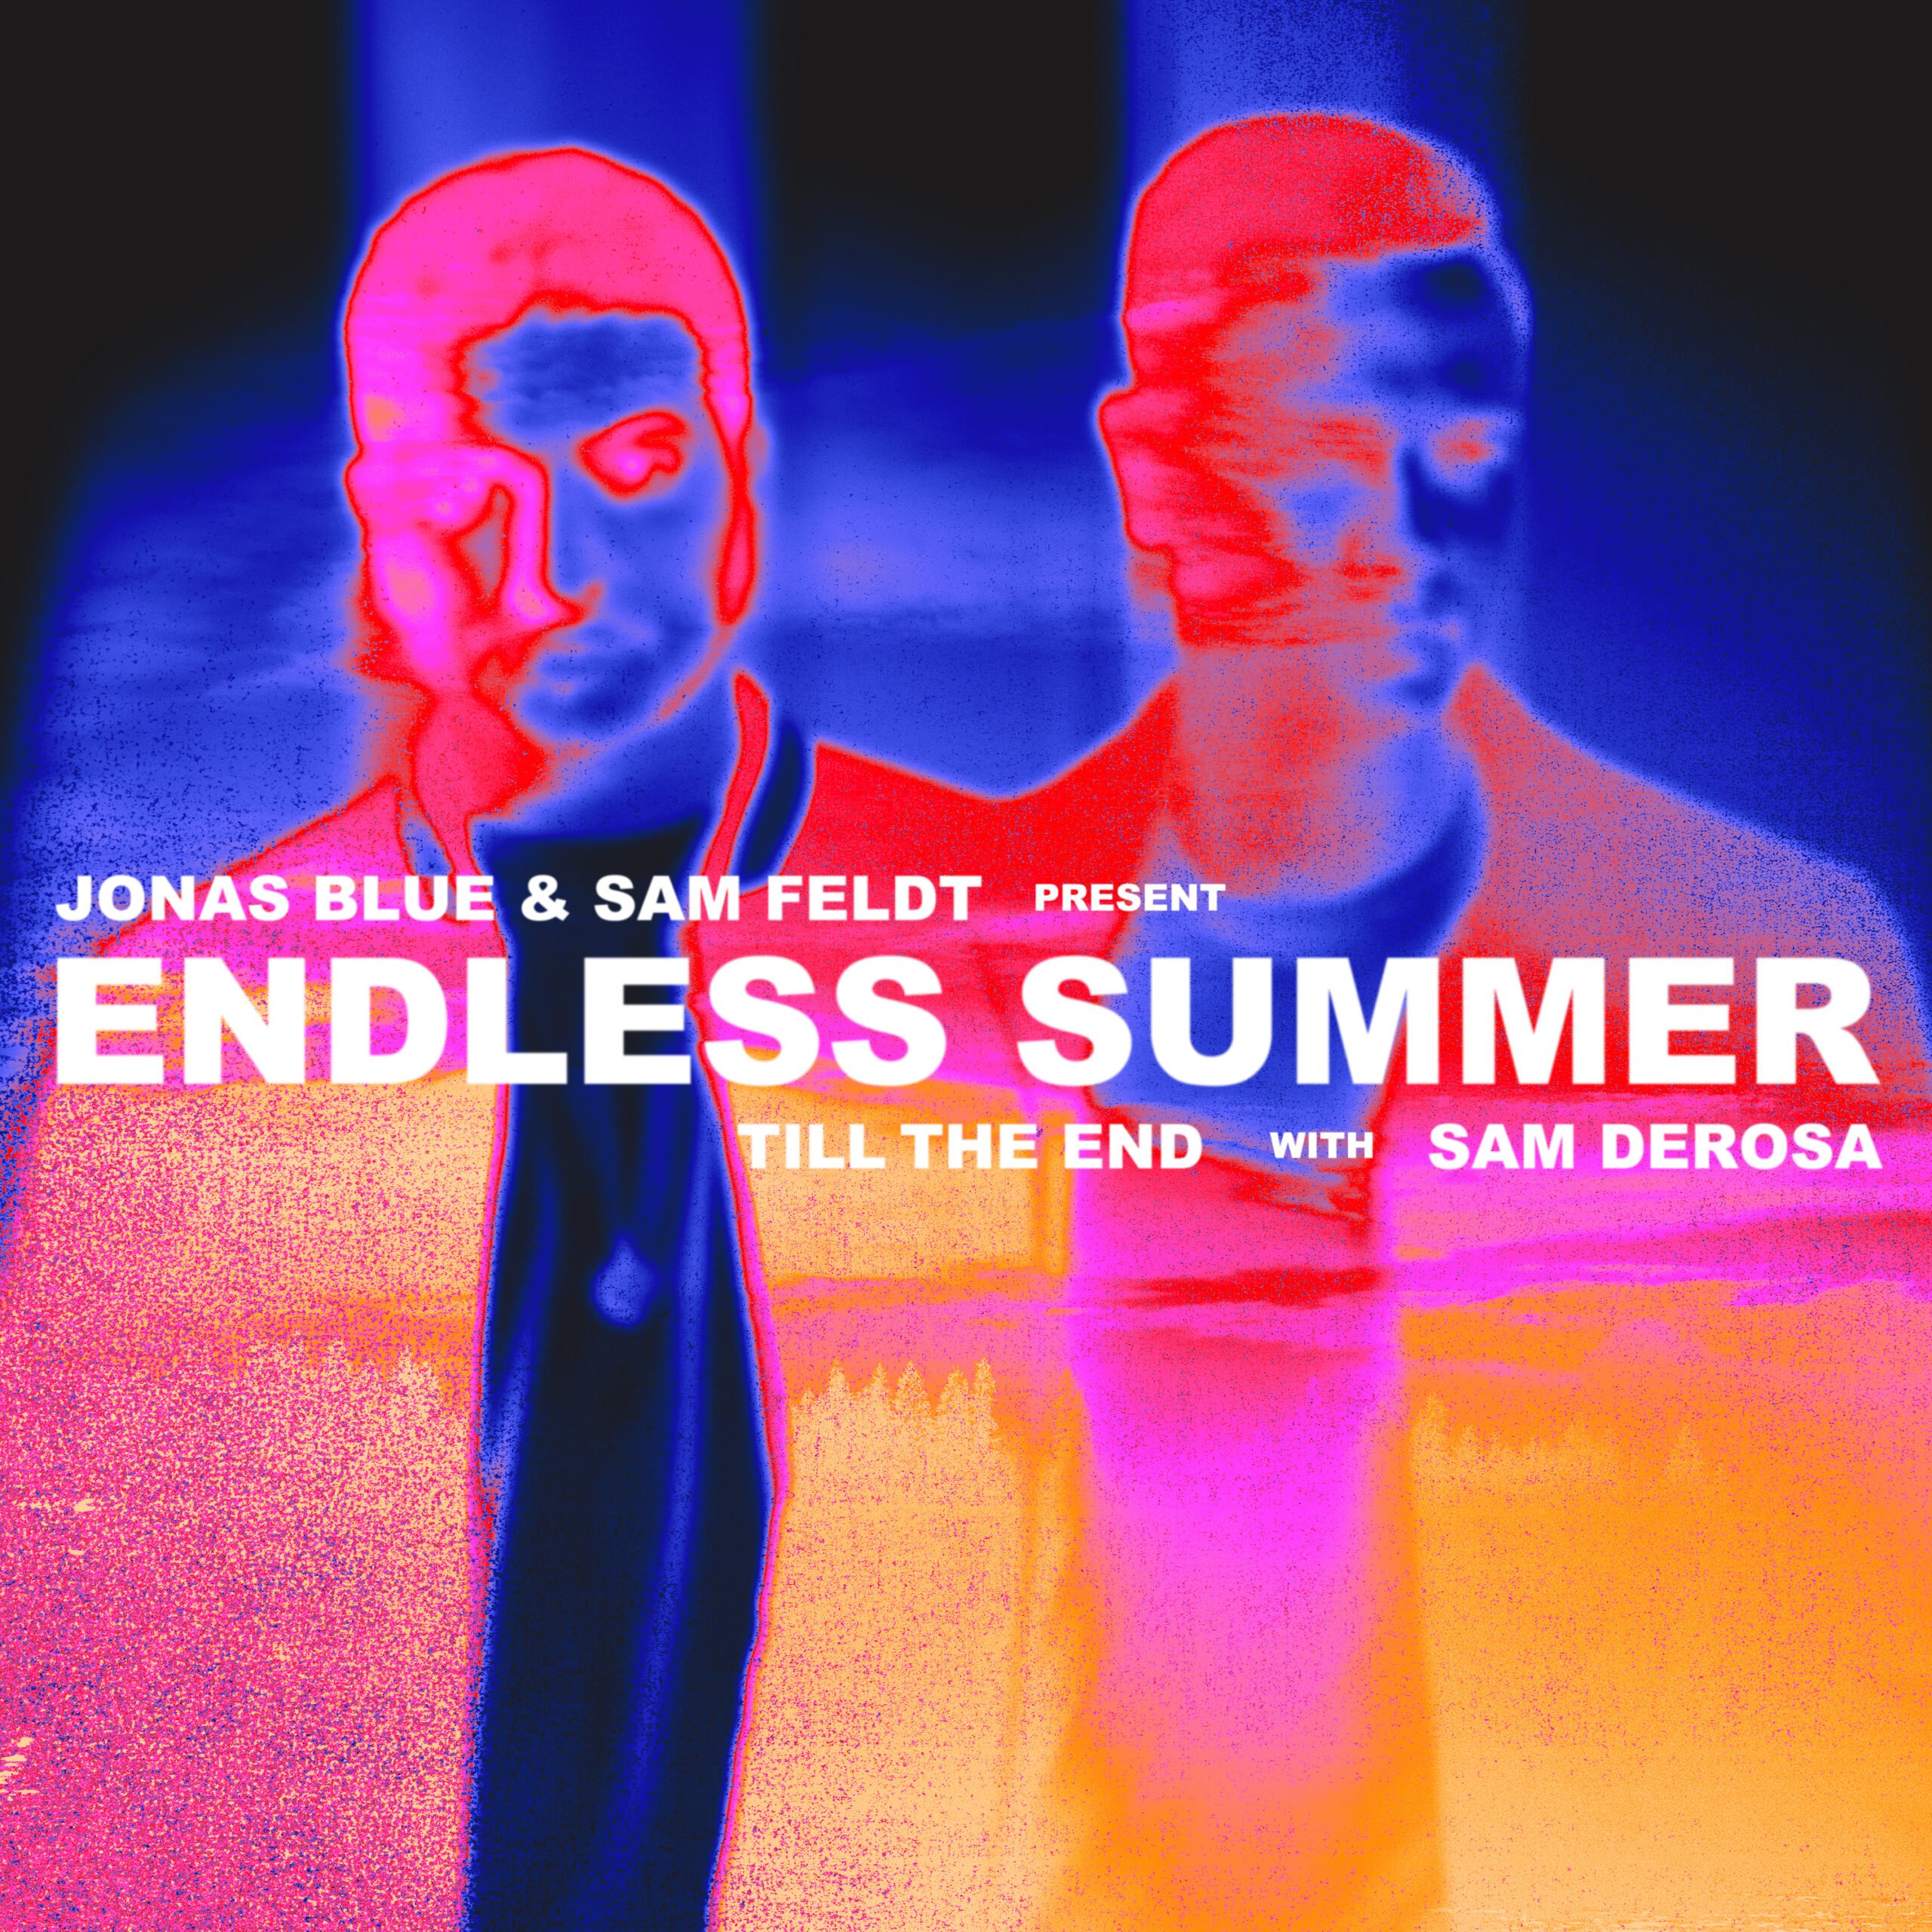 Endless Summer Artwork via NIkki Crystal for Universal Music Group for use by 360 Magazine